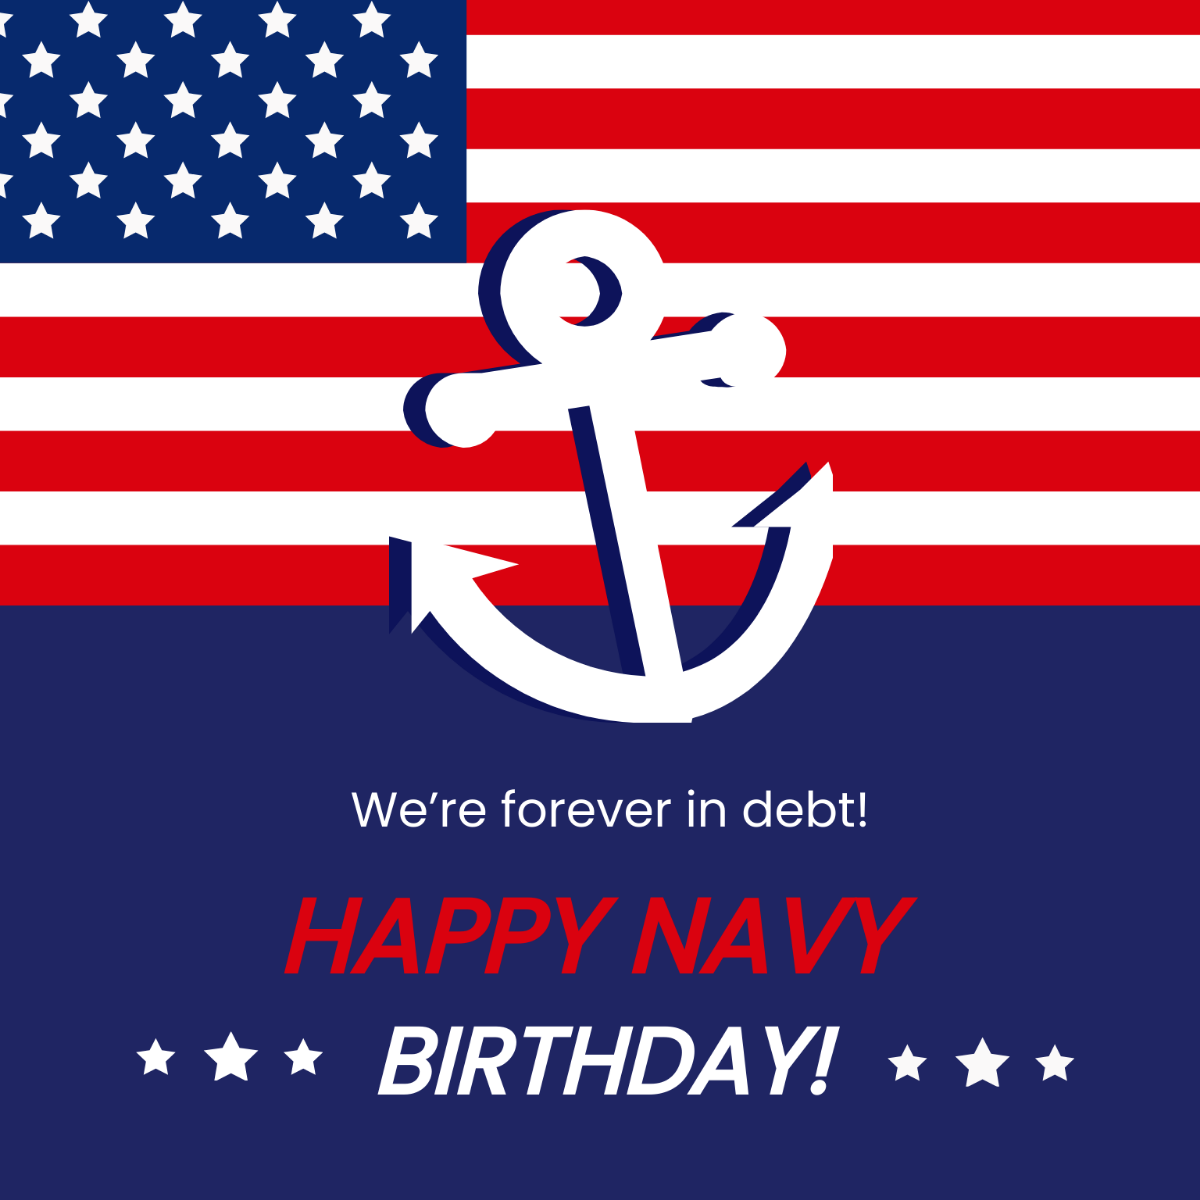 Free Navy Birthday Greeting Card Vector Template